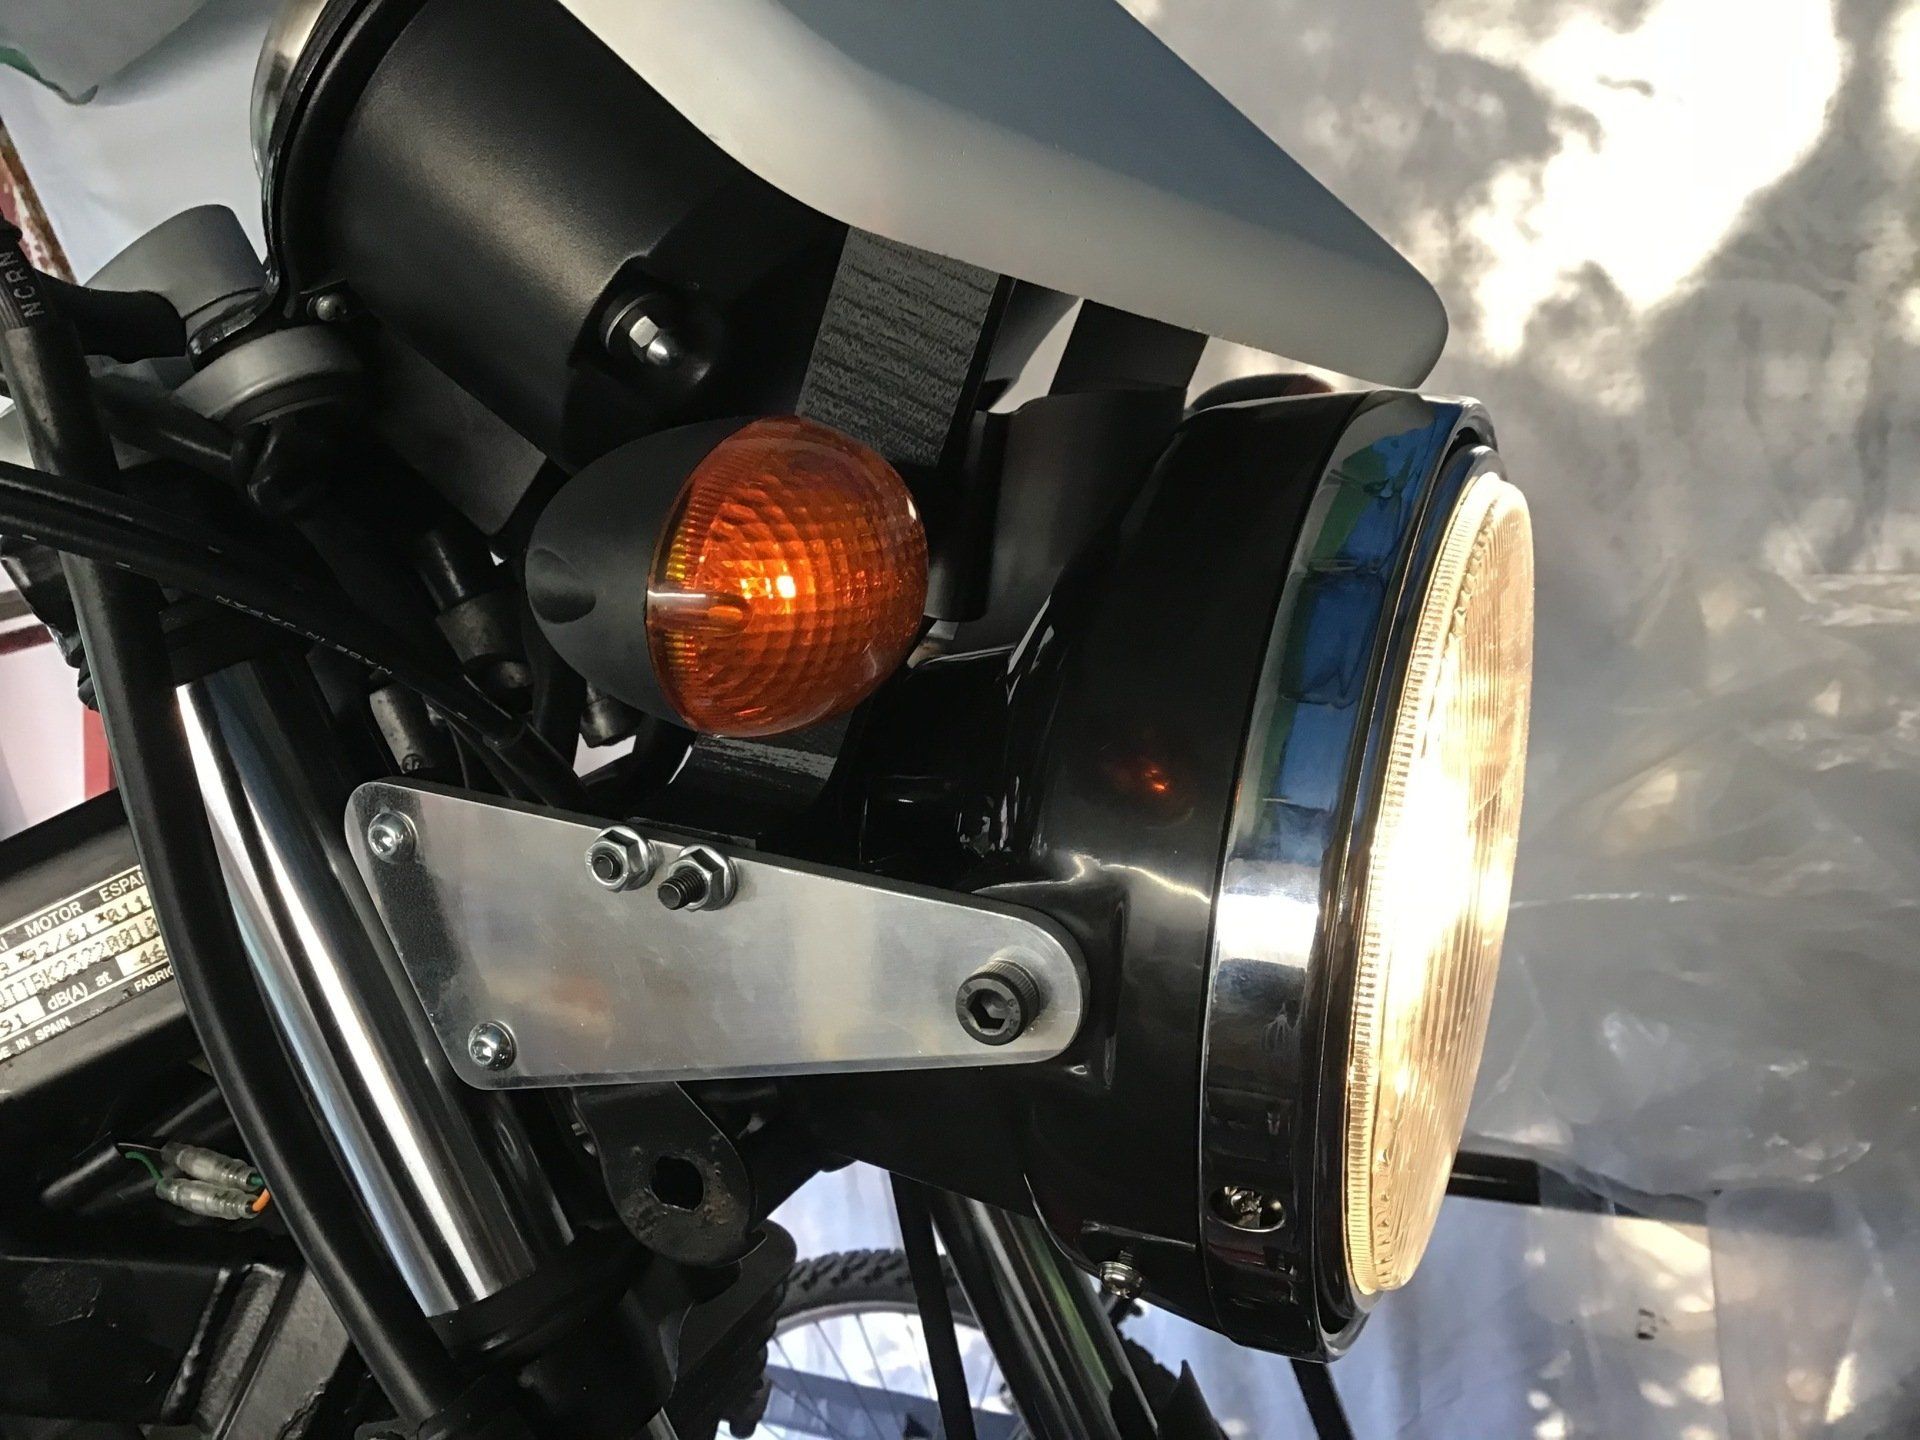 New headlight for GS500